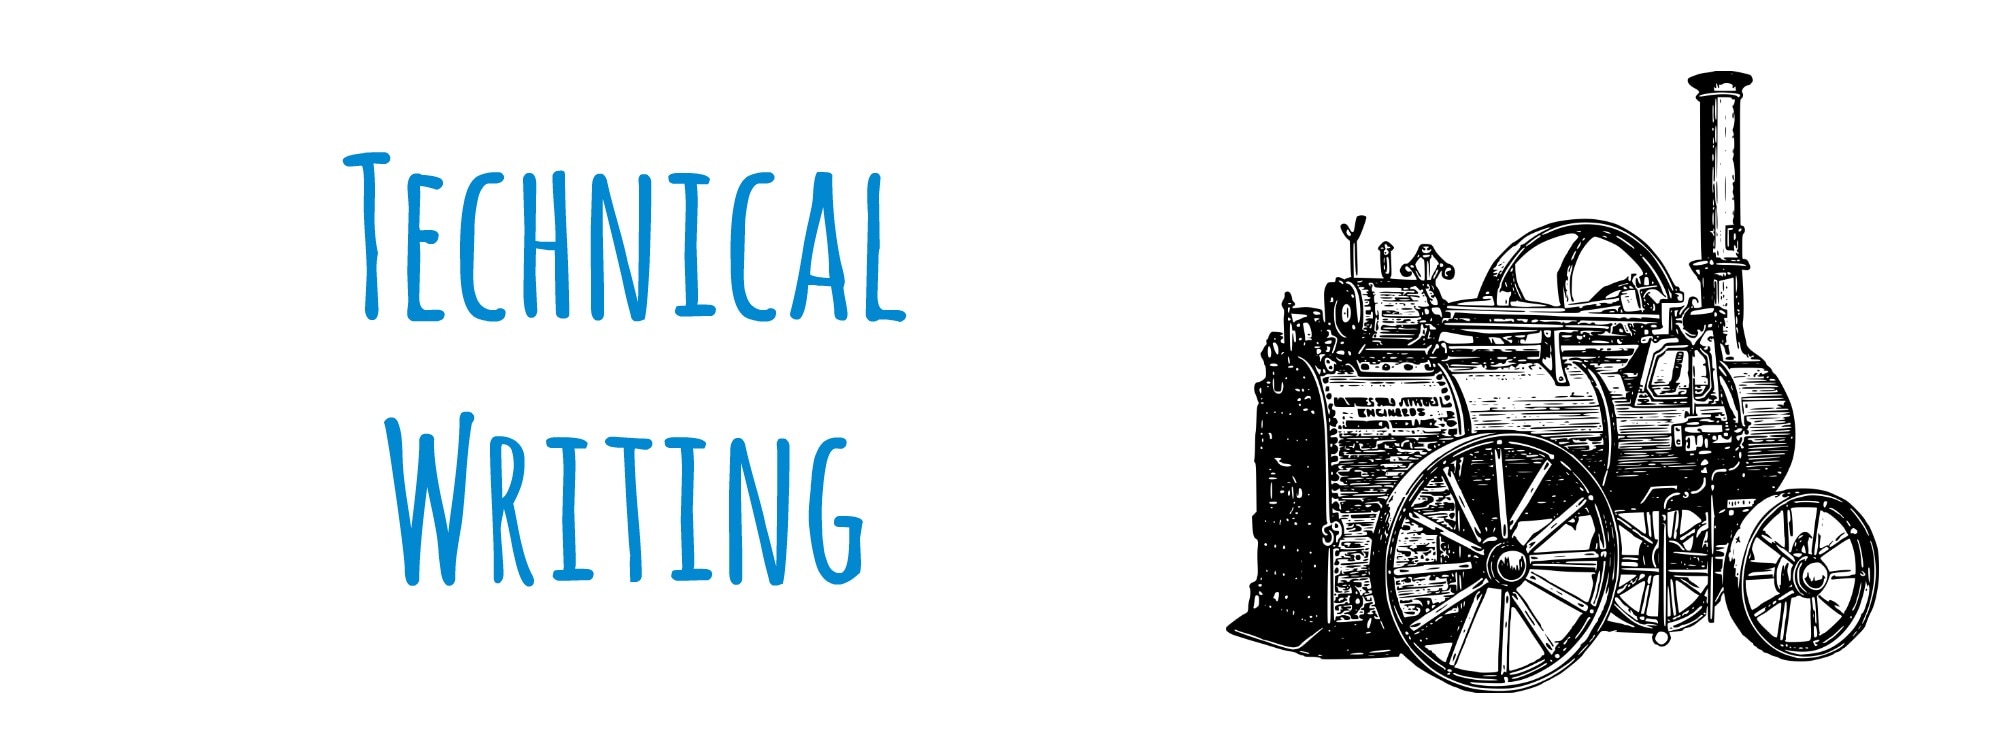 Technical Writing, Scientific Writing, Technical Documents, Technical Writers